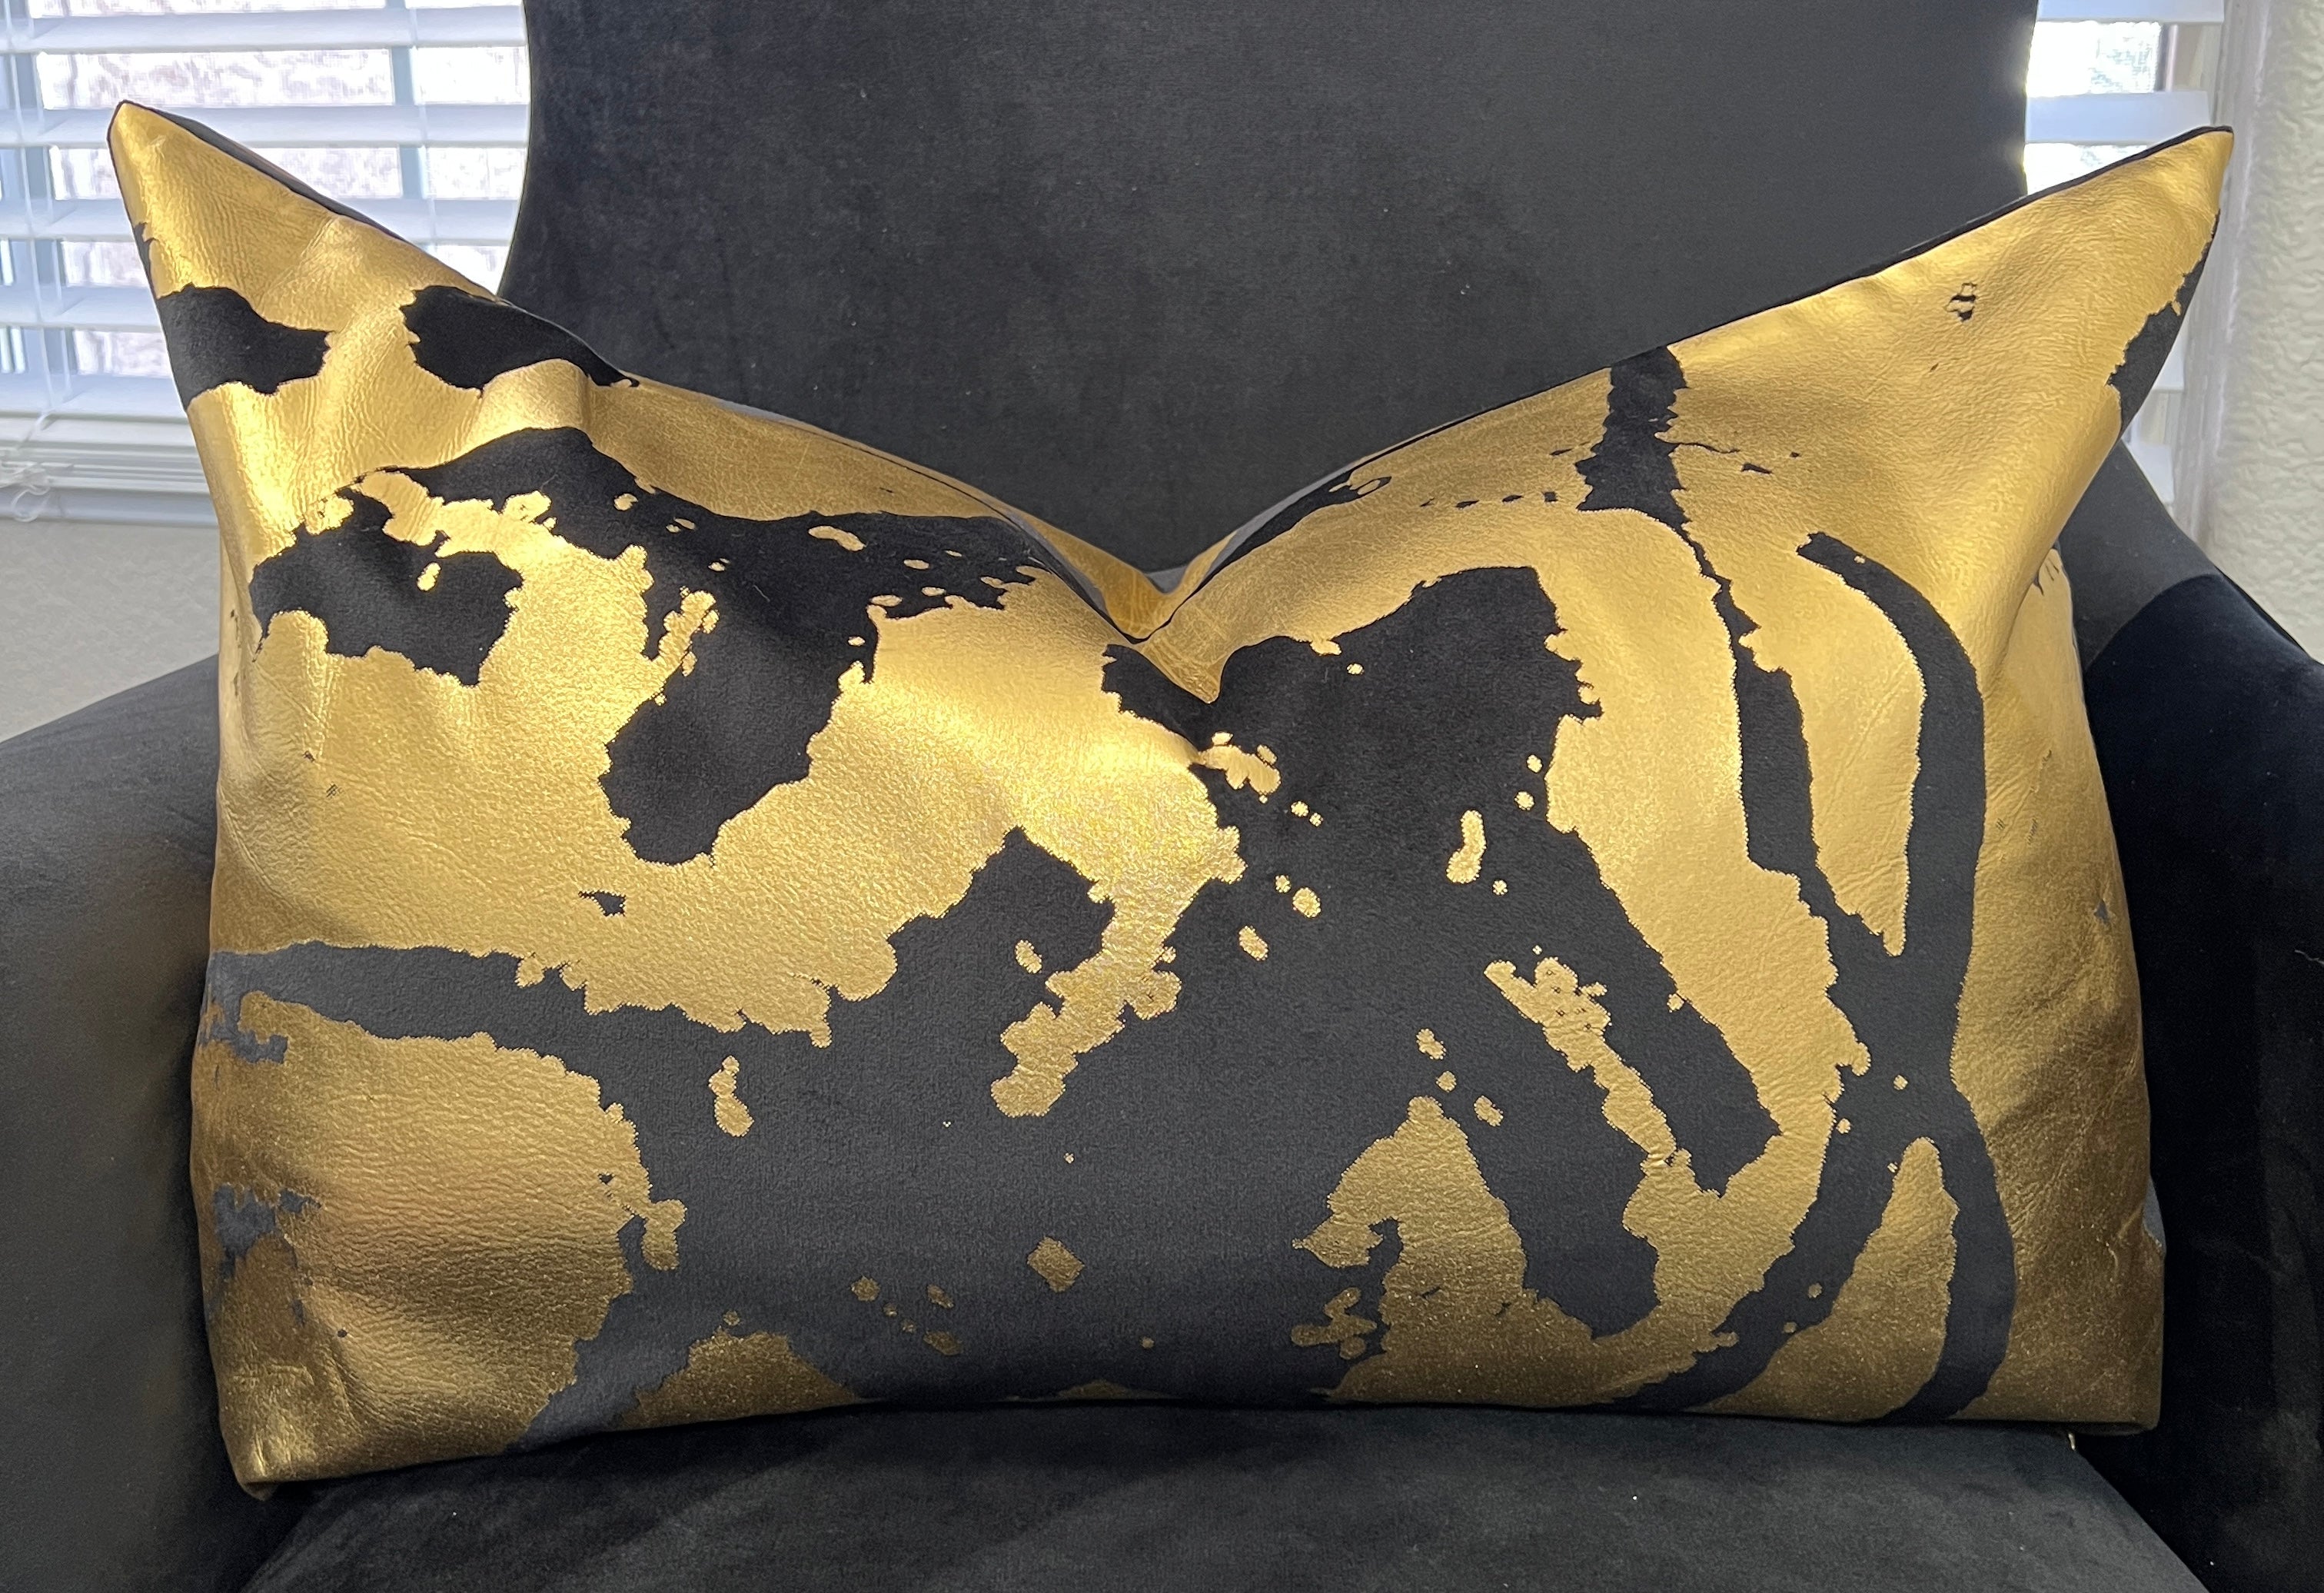 The Luxe Gold & Black Pillow